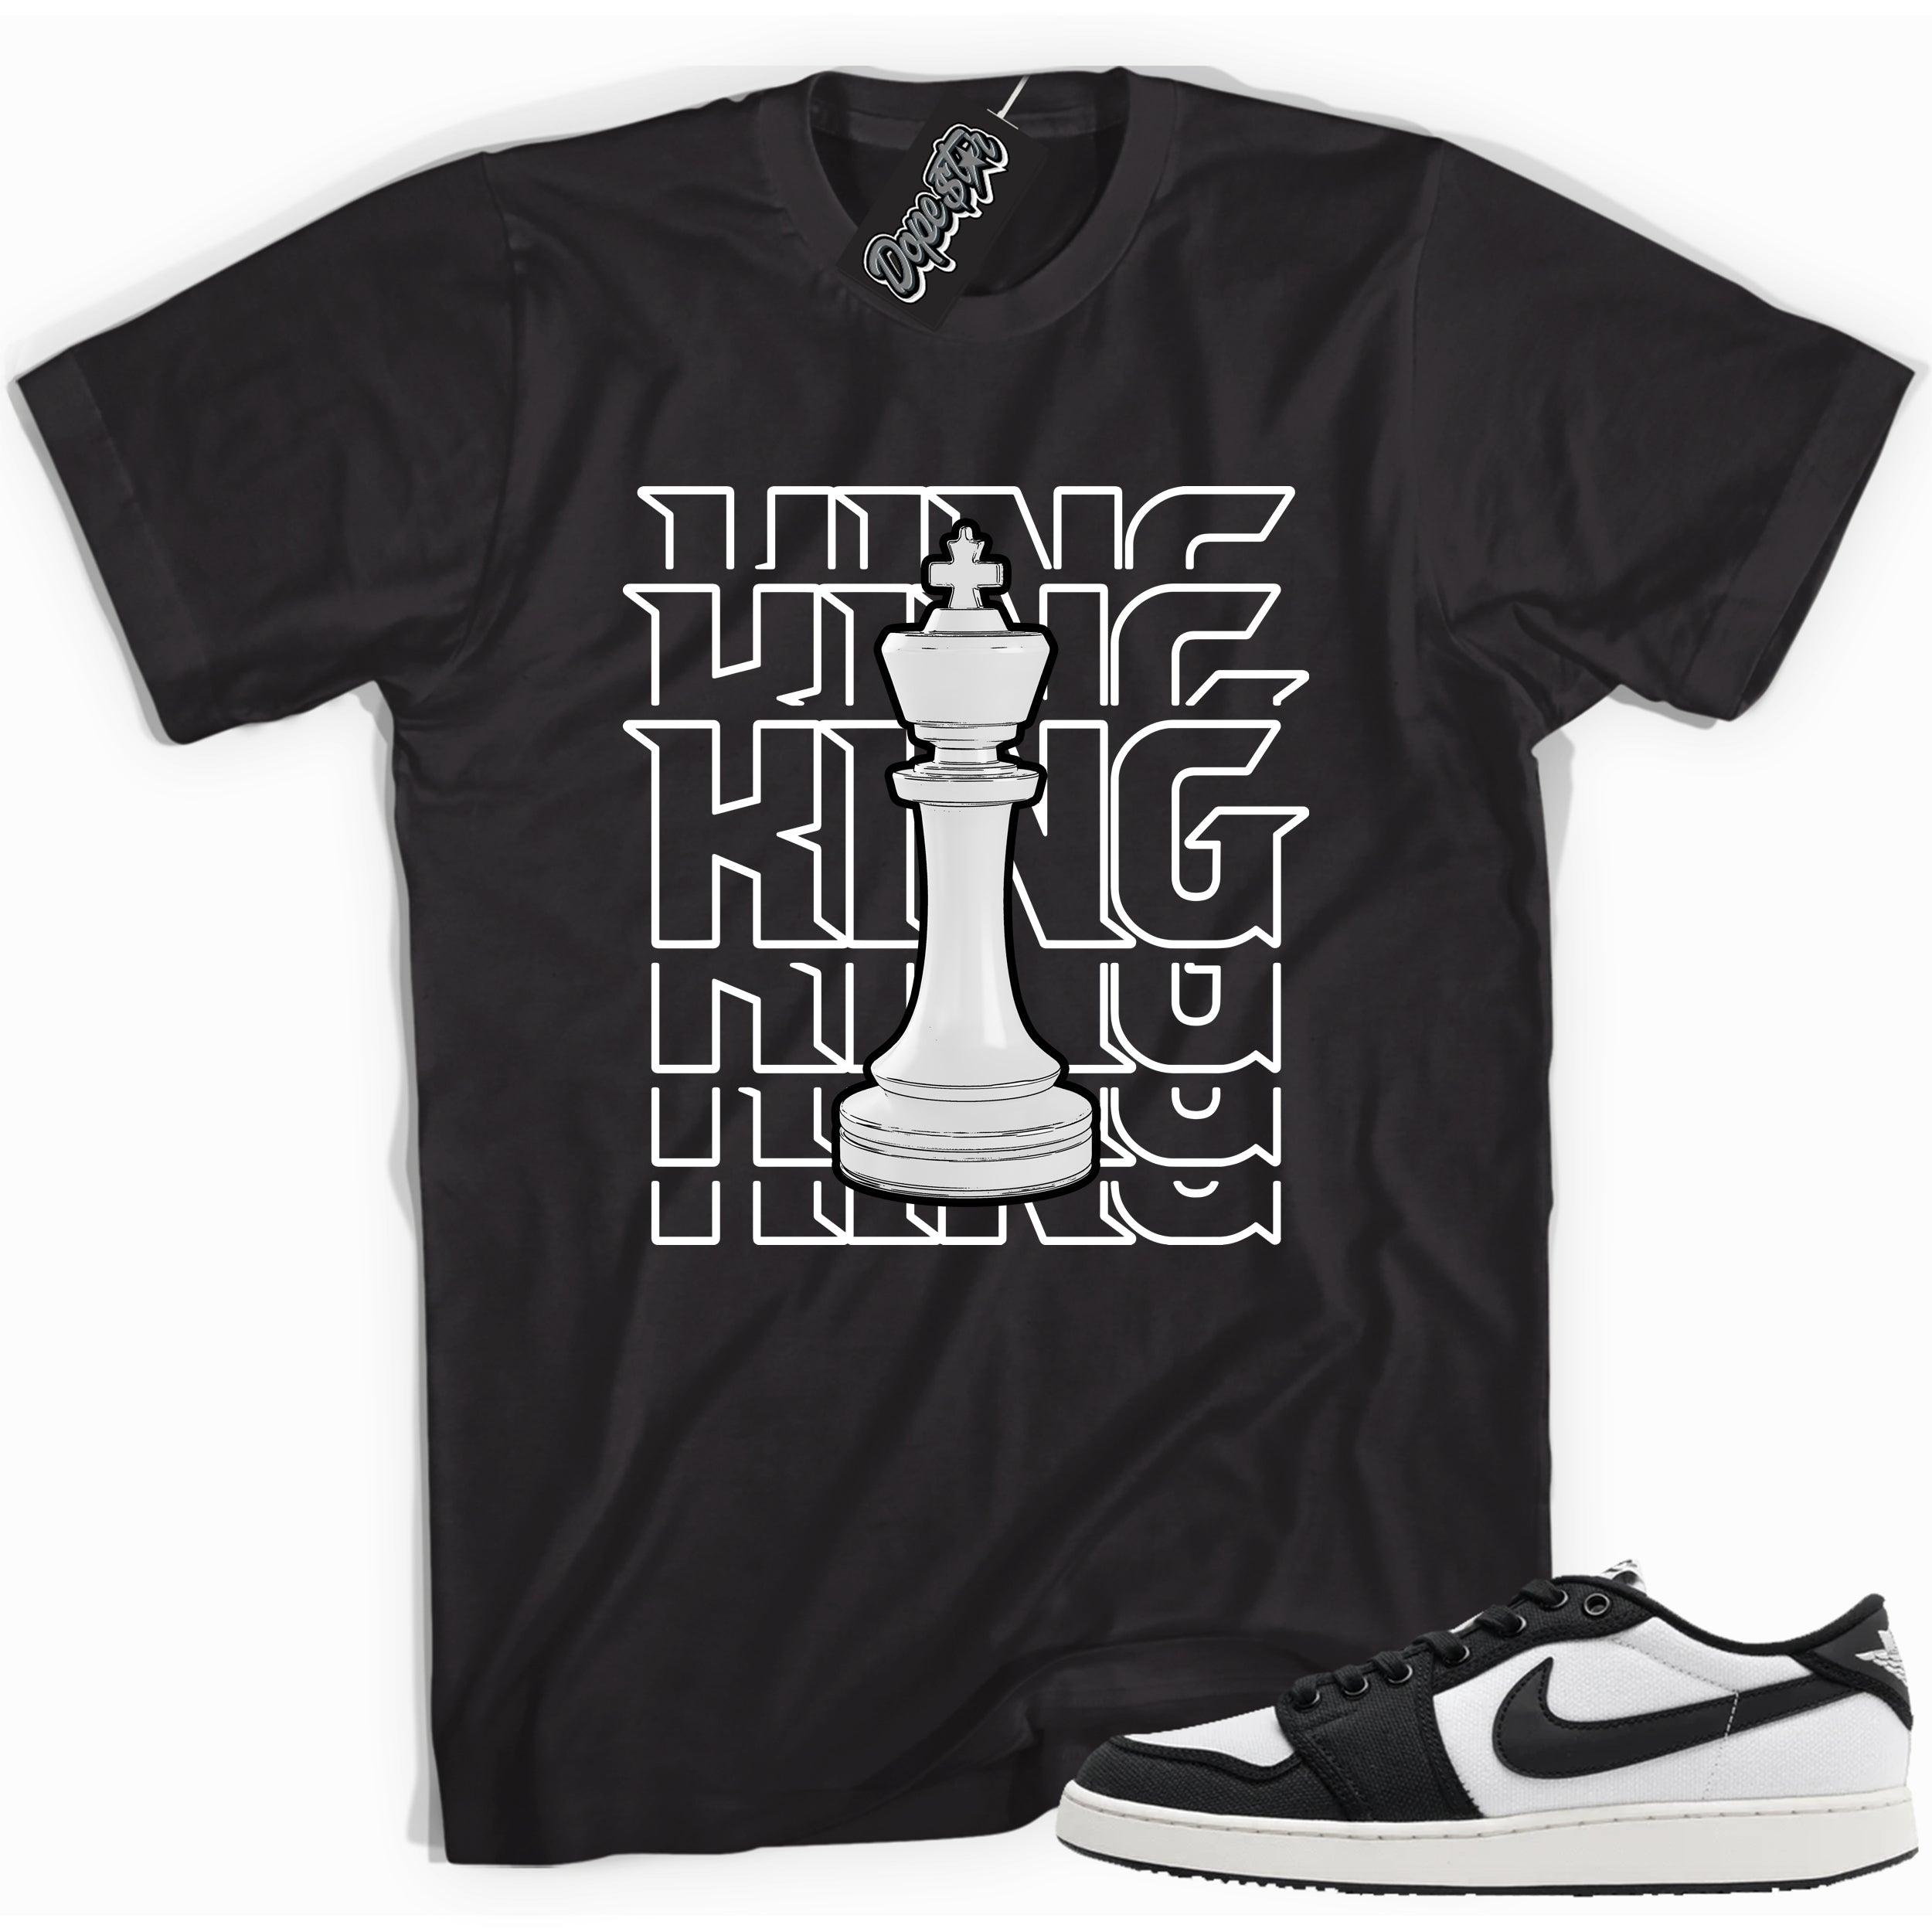 Cool black graphic tee with 'king' print, that perfectly matches Air Jordan 1 Retro Ajko Low Black & White sneakers.